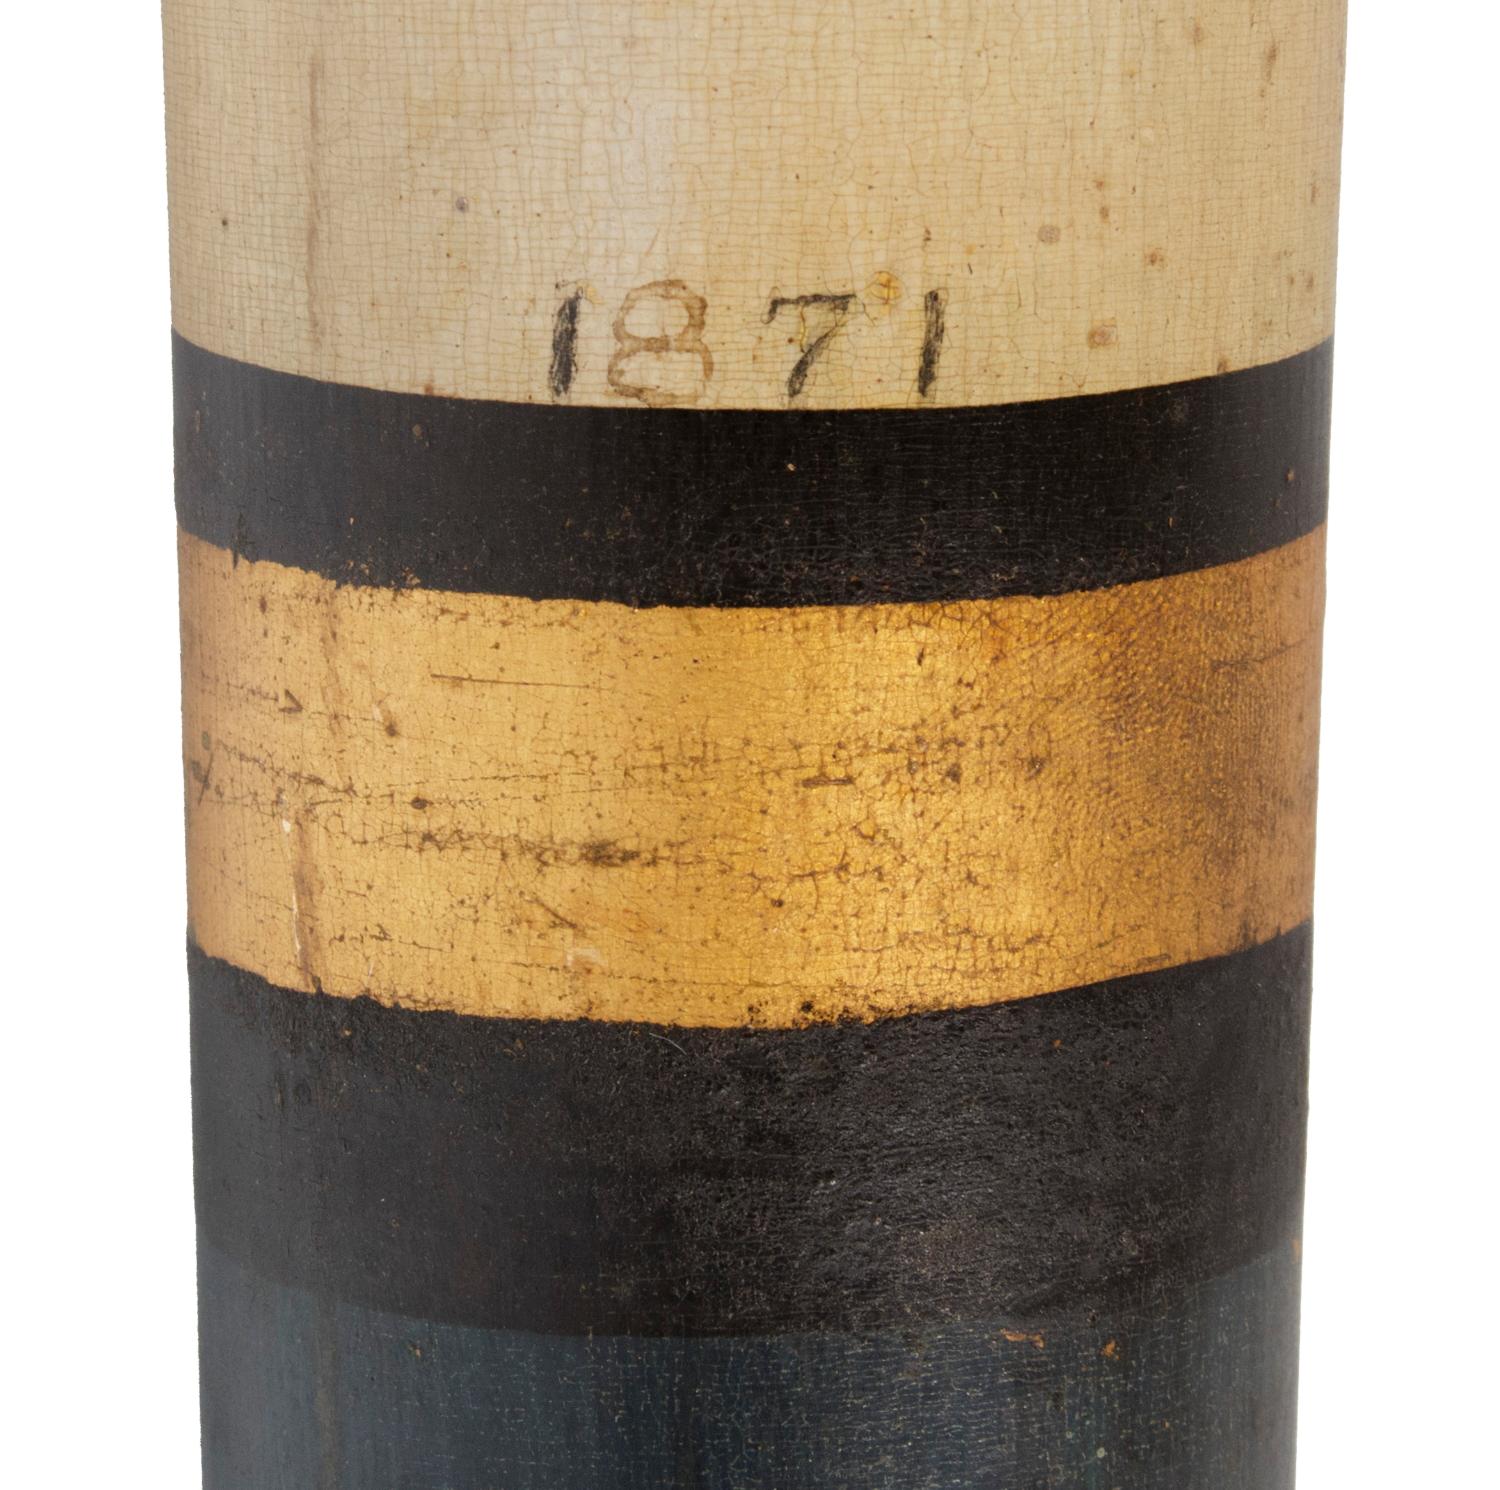 Oversized, Paint-Decorated Baseball Bat Presented to J. Whipple In Good Condition For Sale In York County, PA